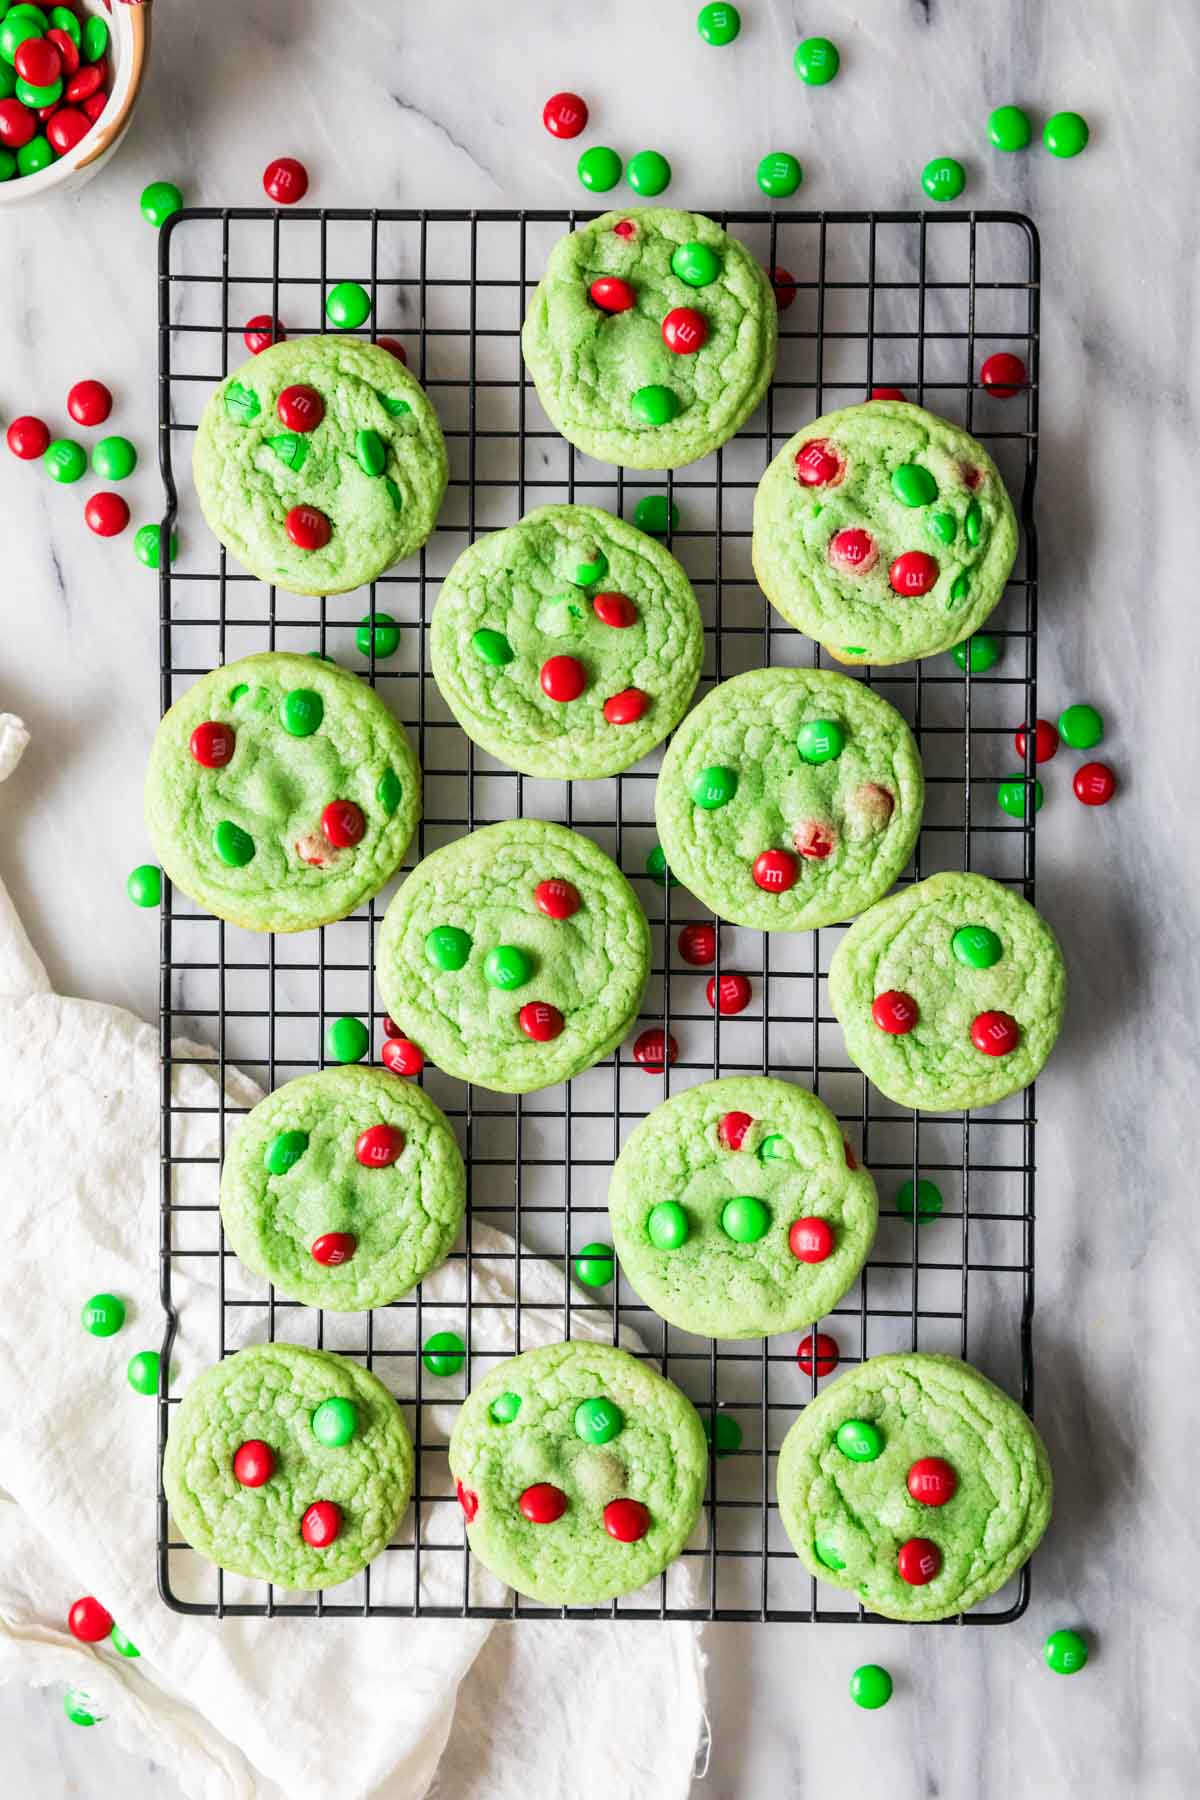 Overhead view of pale green cookies topped with red and green candies on a metal cooling rack.